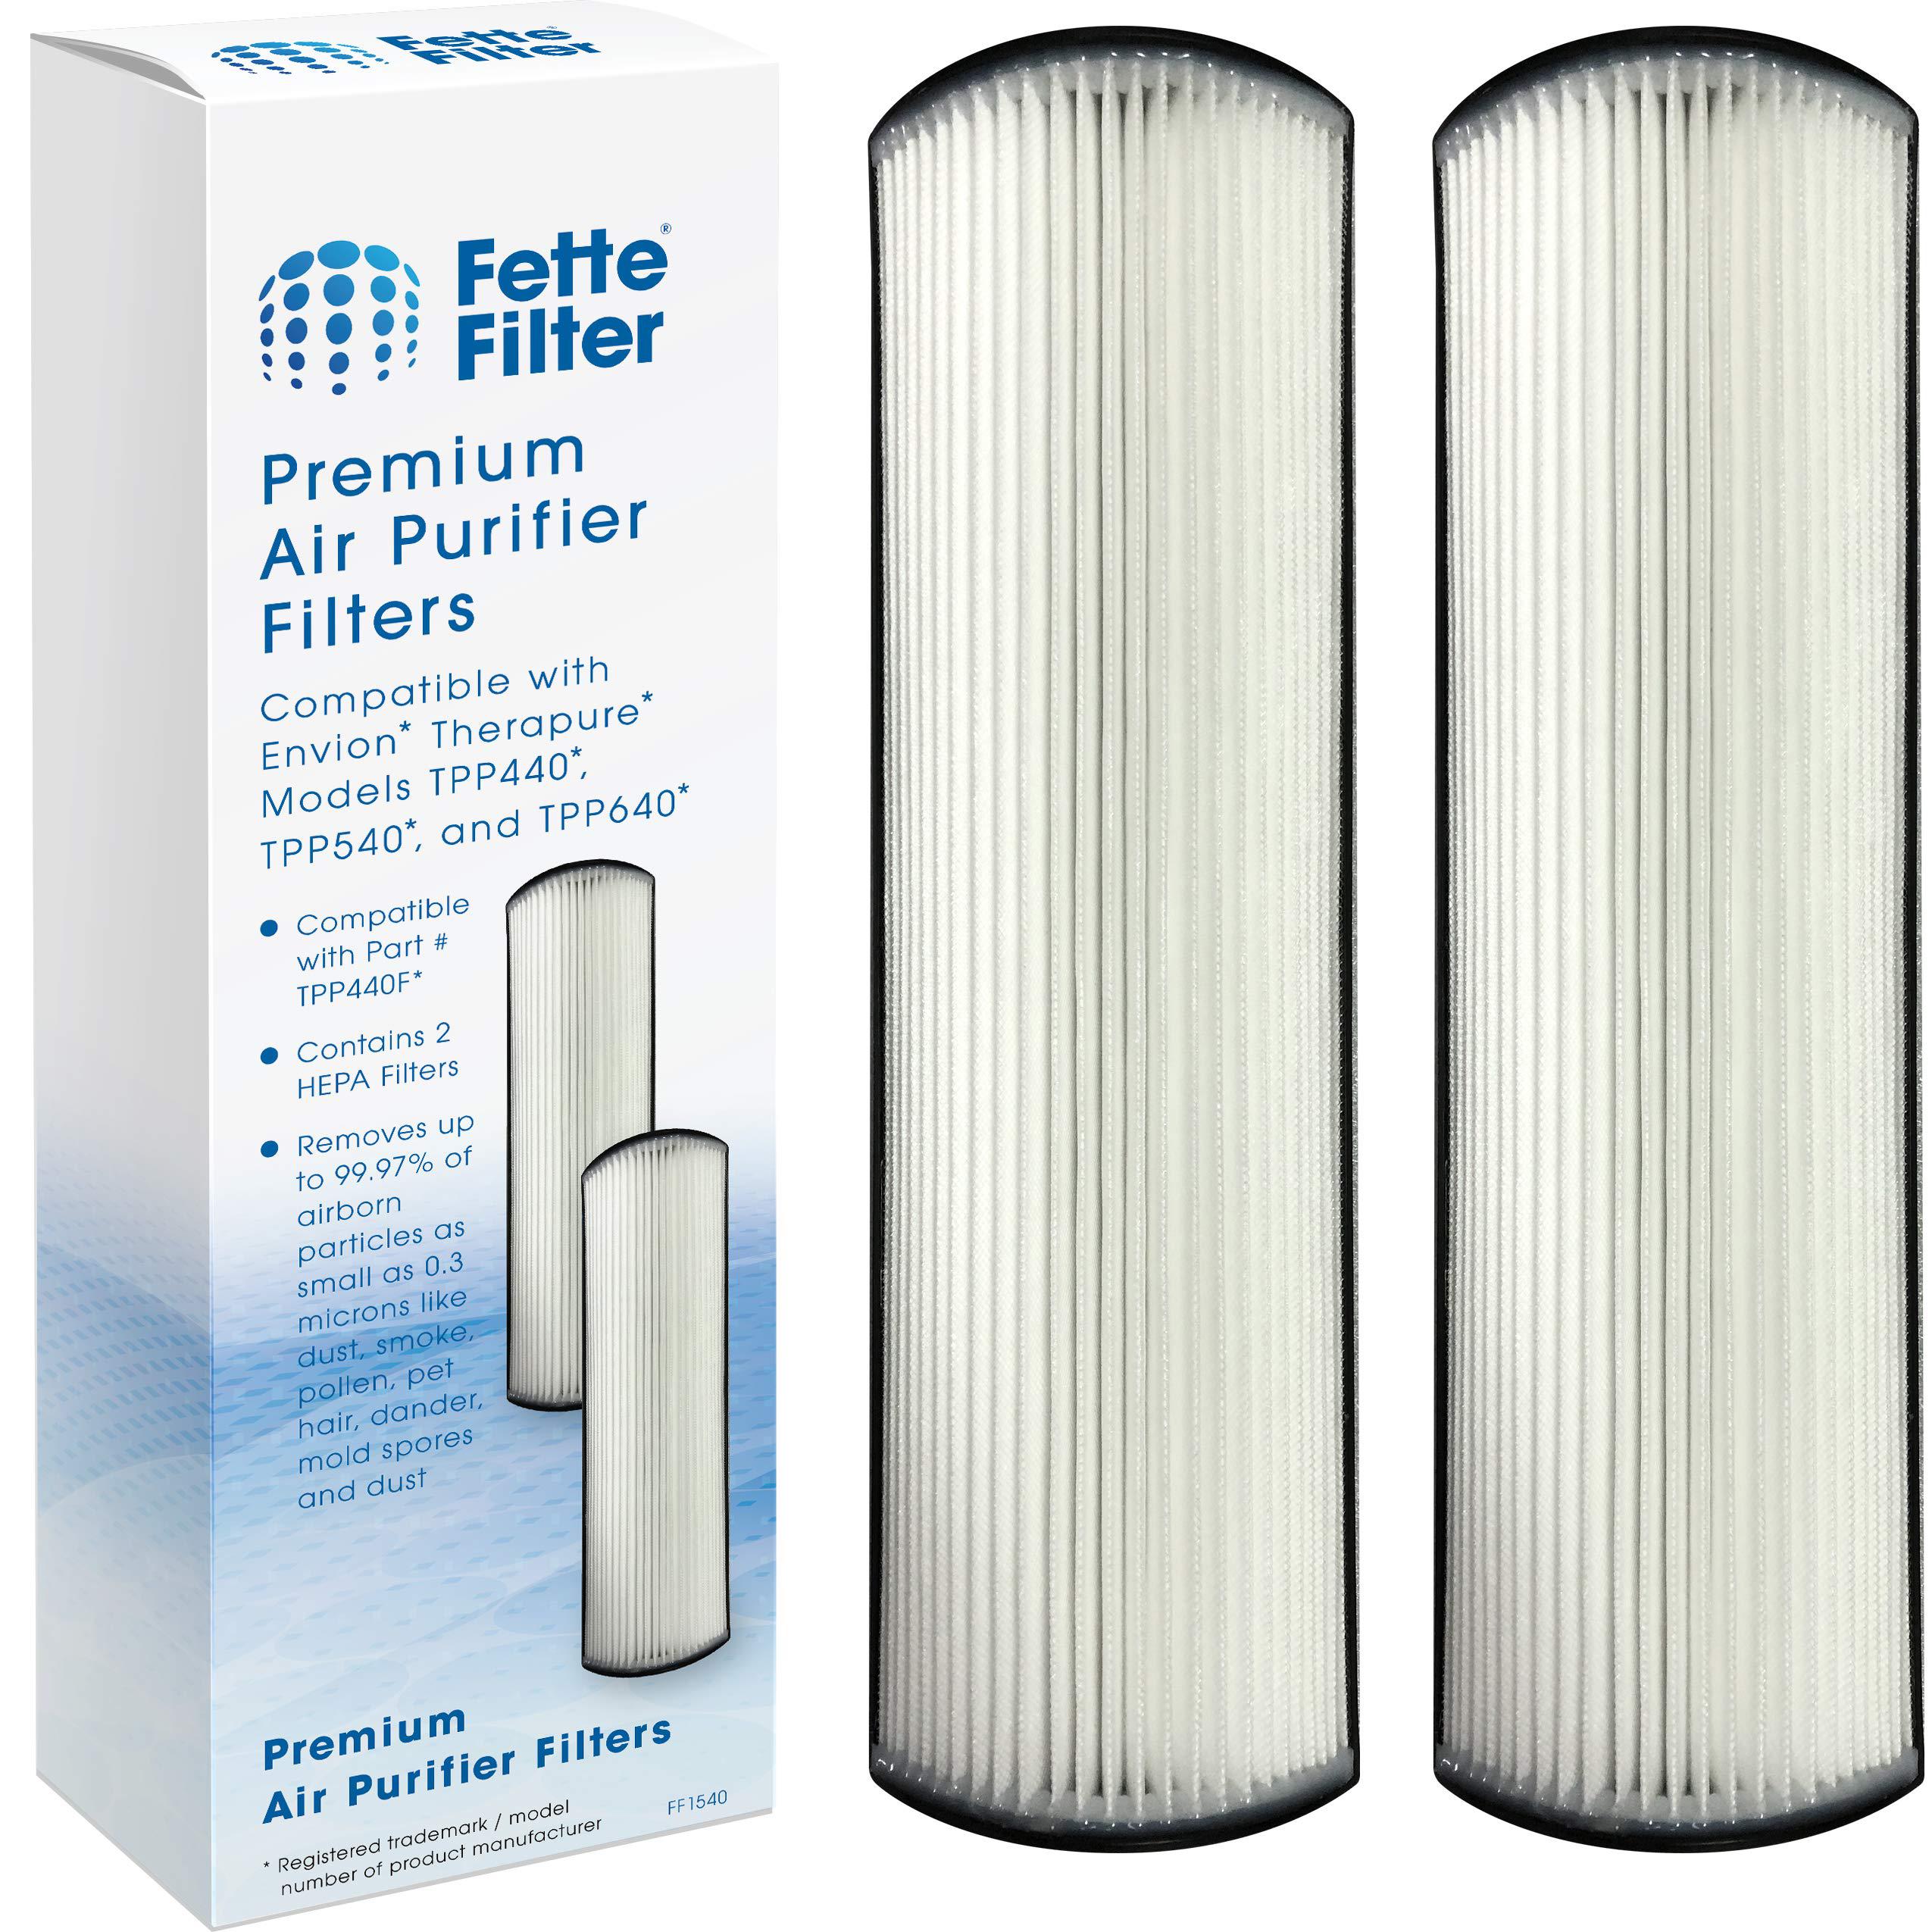 fette filter - tpp440f true hepa h13 replacement filter compatible with therapure envion air purifier models tpp440 tpp540 tp